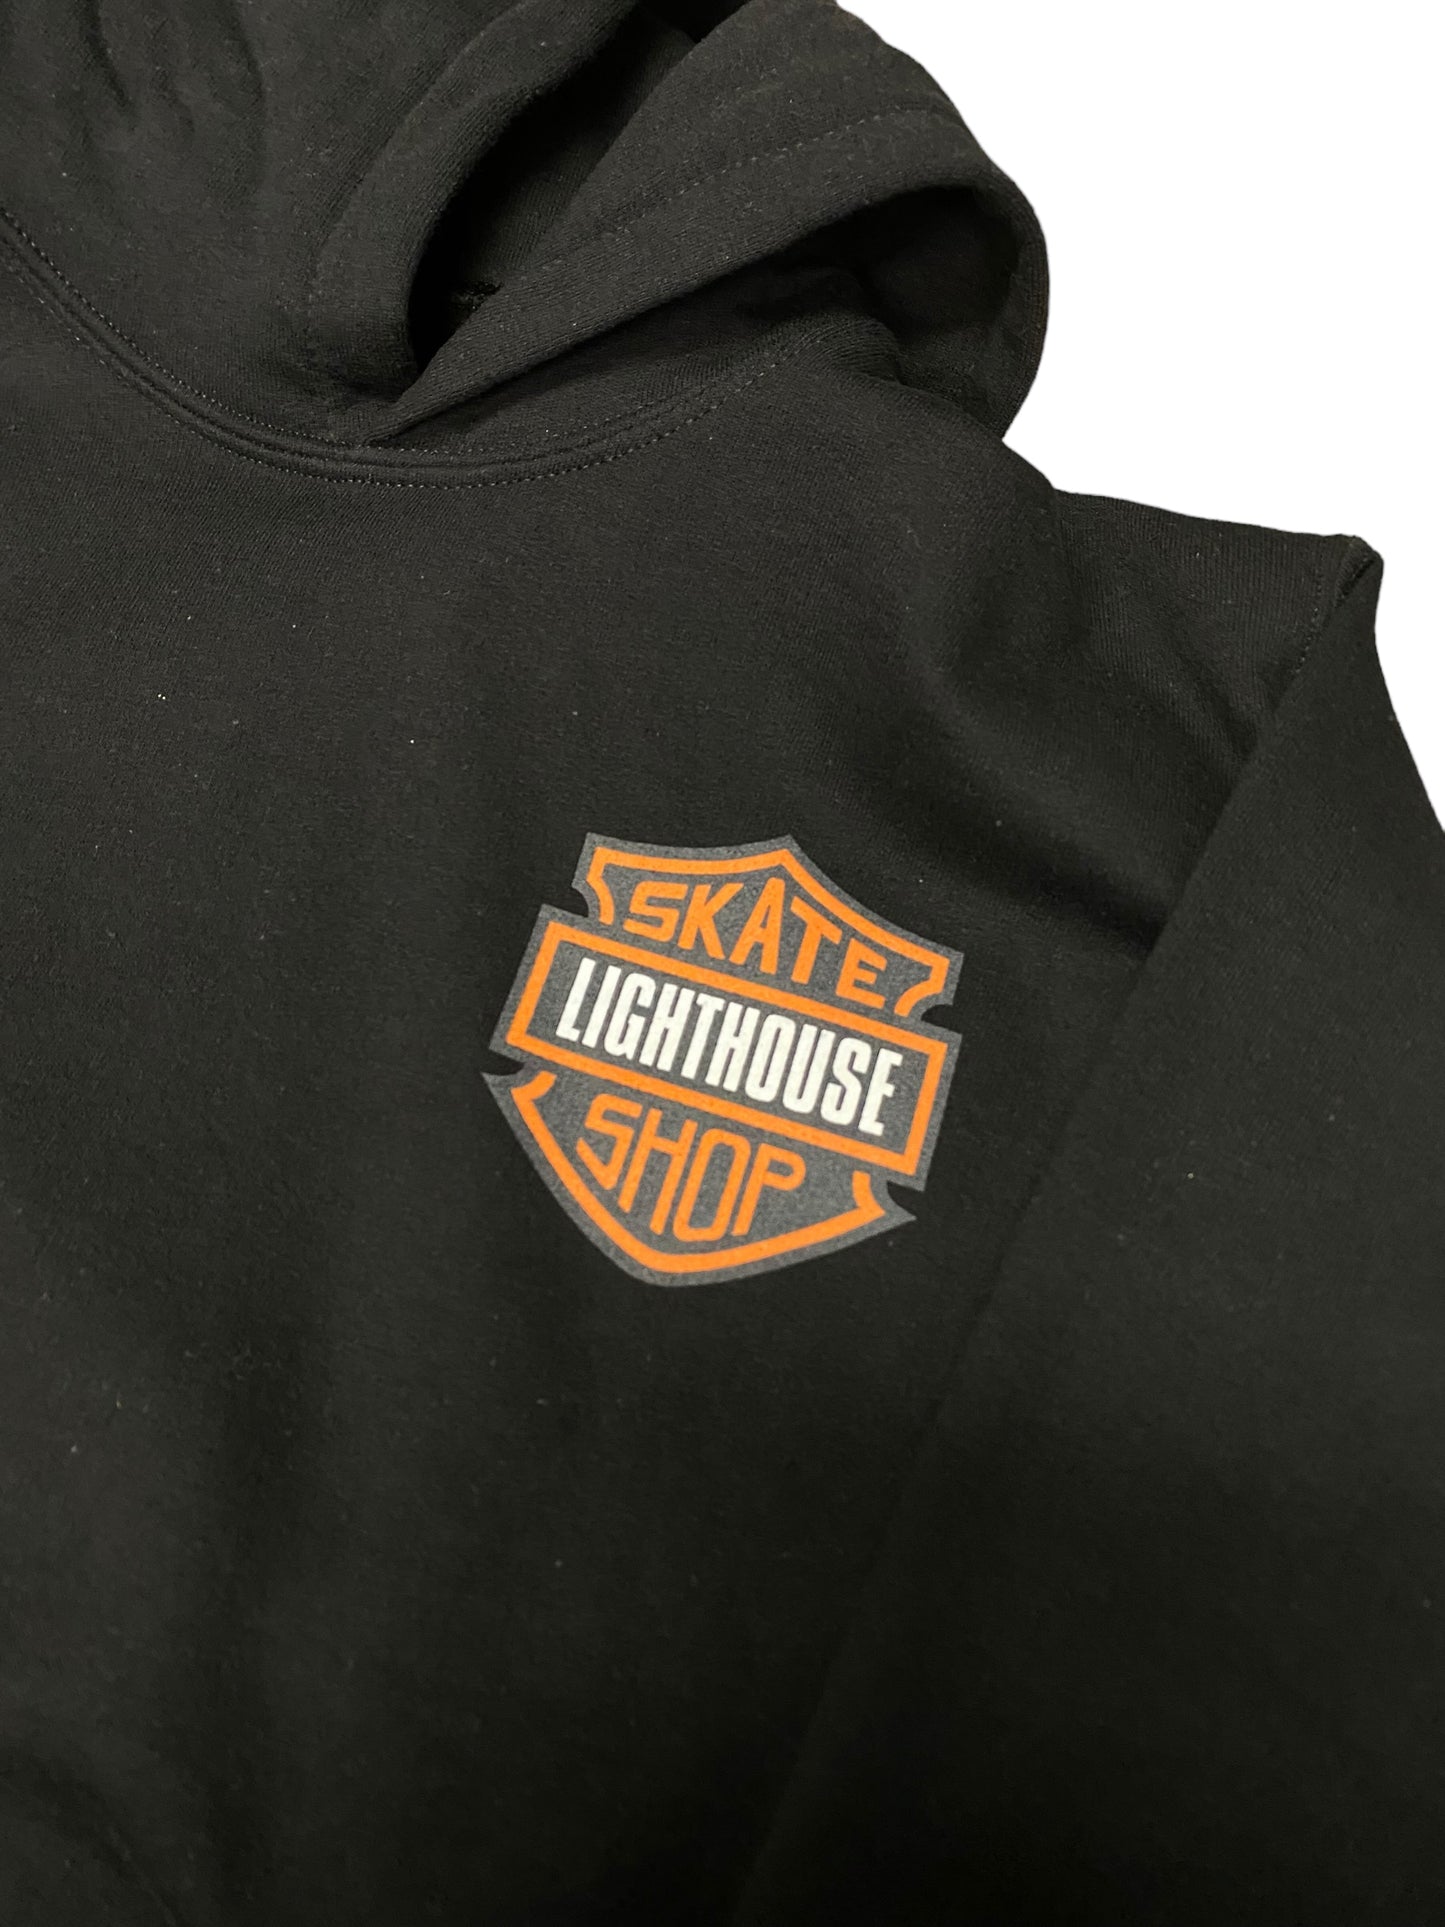 Lighthouse HD Youth Hoodie